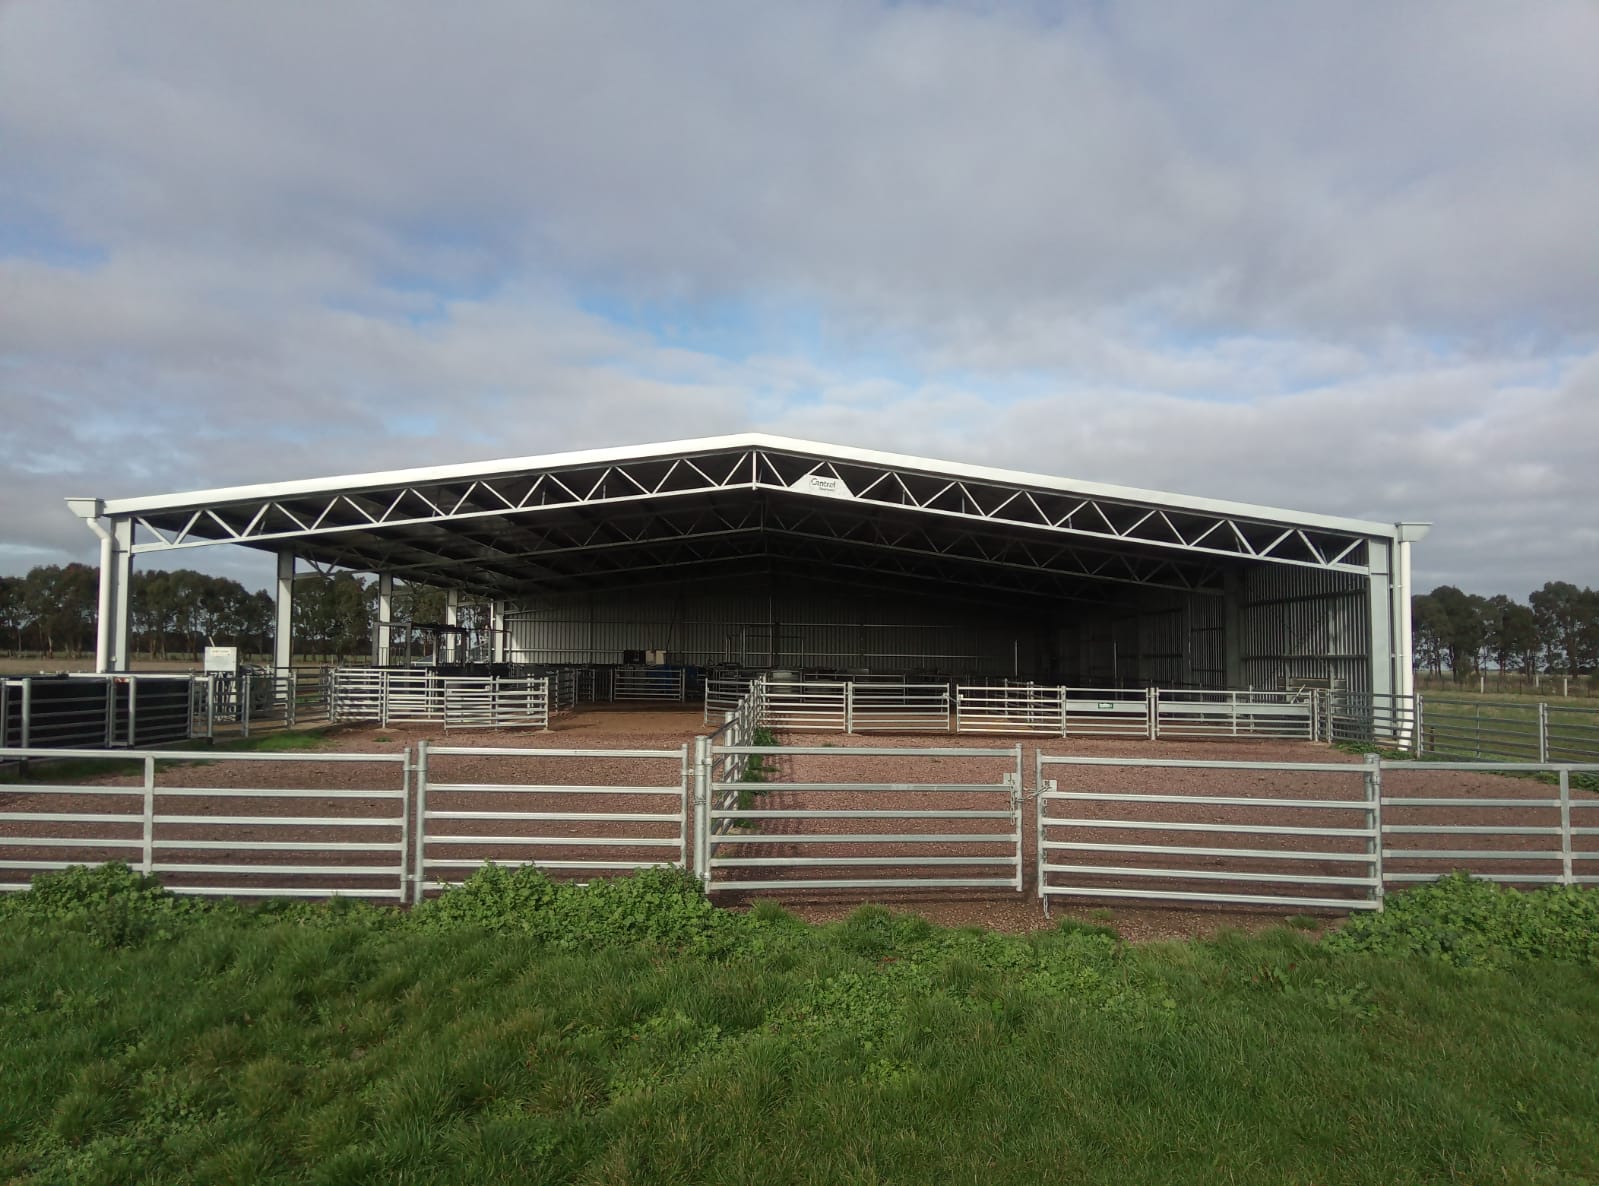 Kilpatrick sheering shed yard cover extension